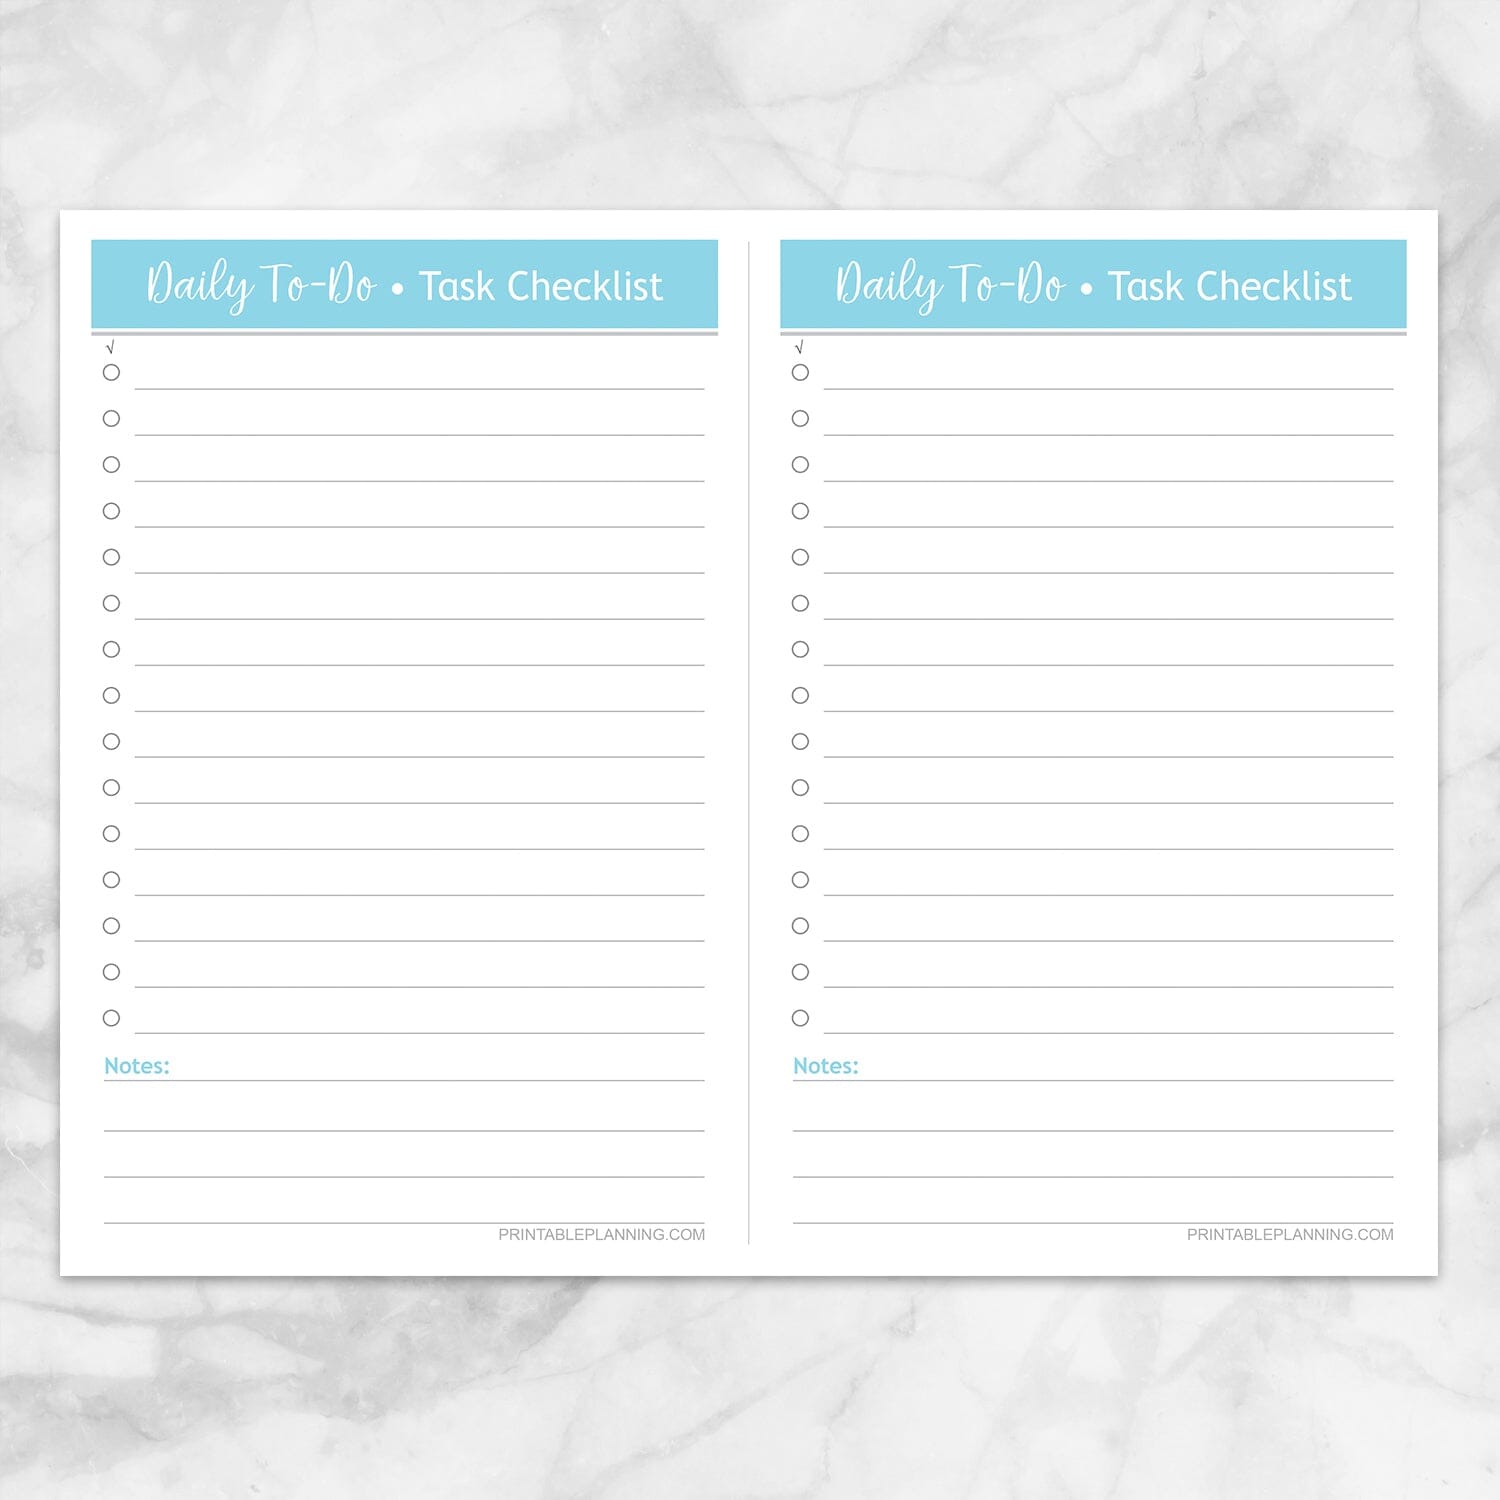 Printable Daily To-Do Lists - 2 Per Page - Task Checklists in Blue at Printable Planning.